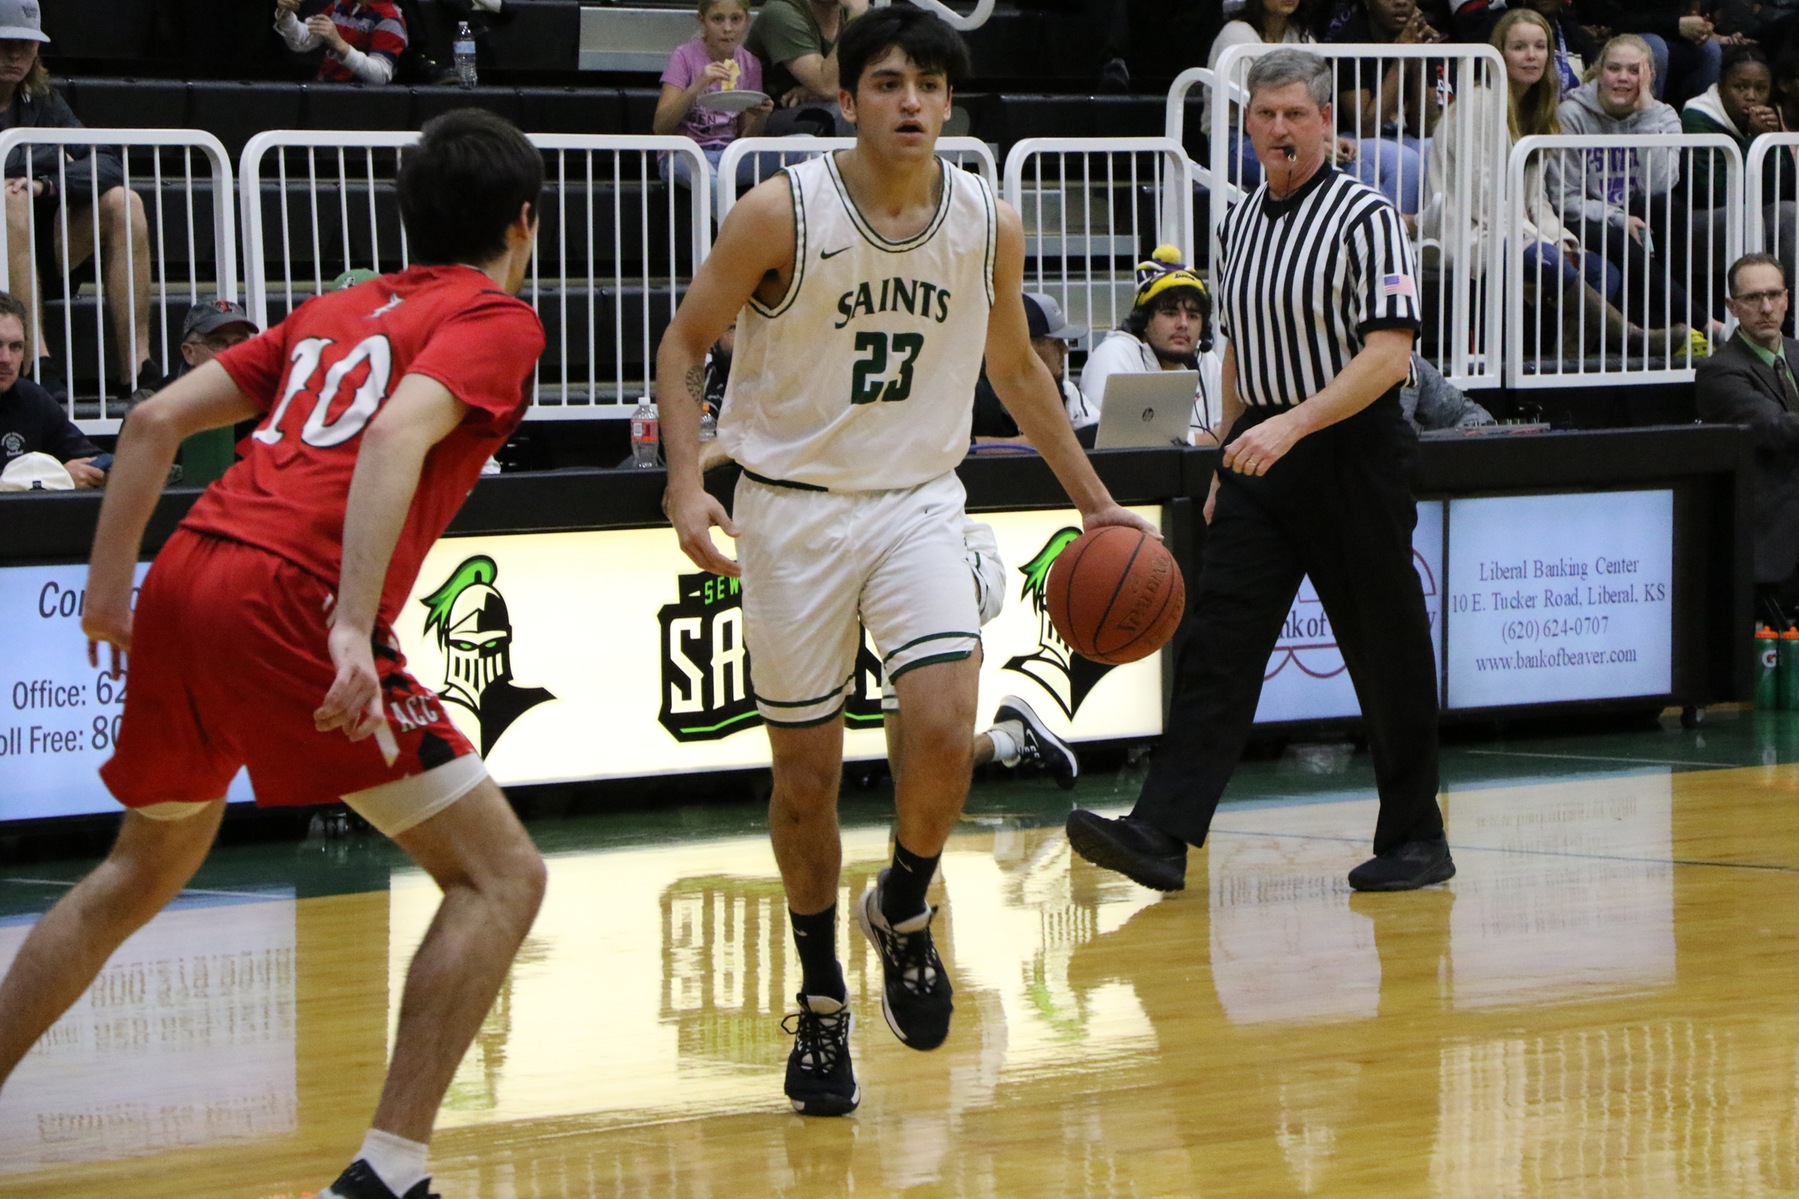 Saints fall to Allen in the final minutes 78-75